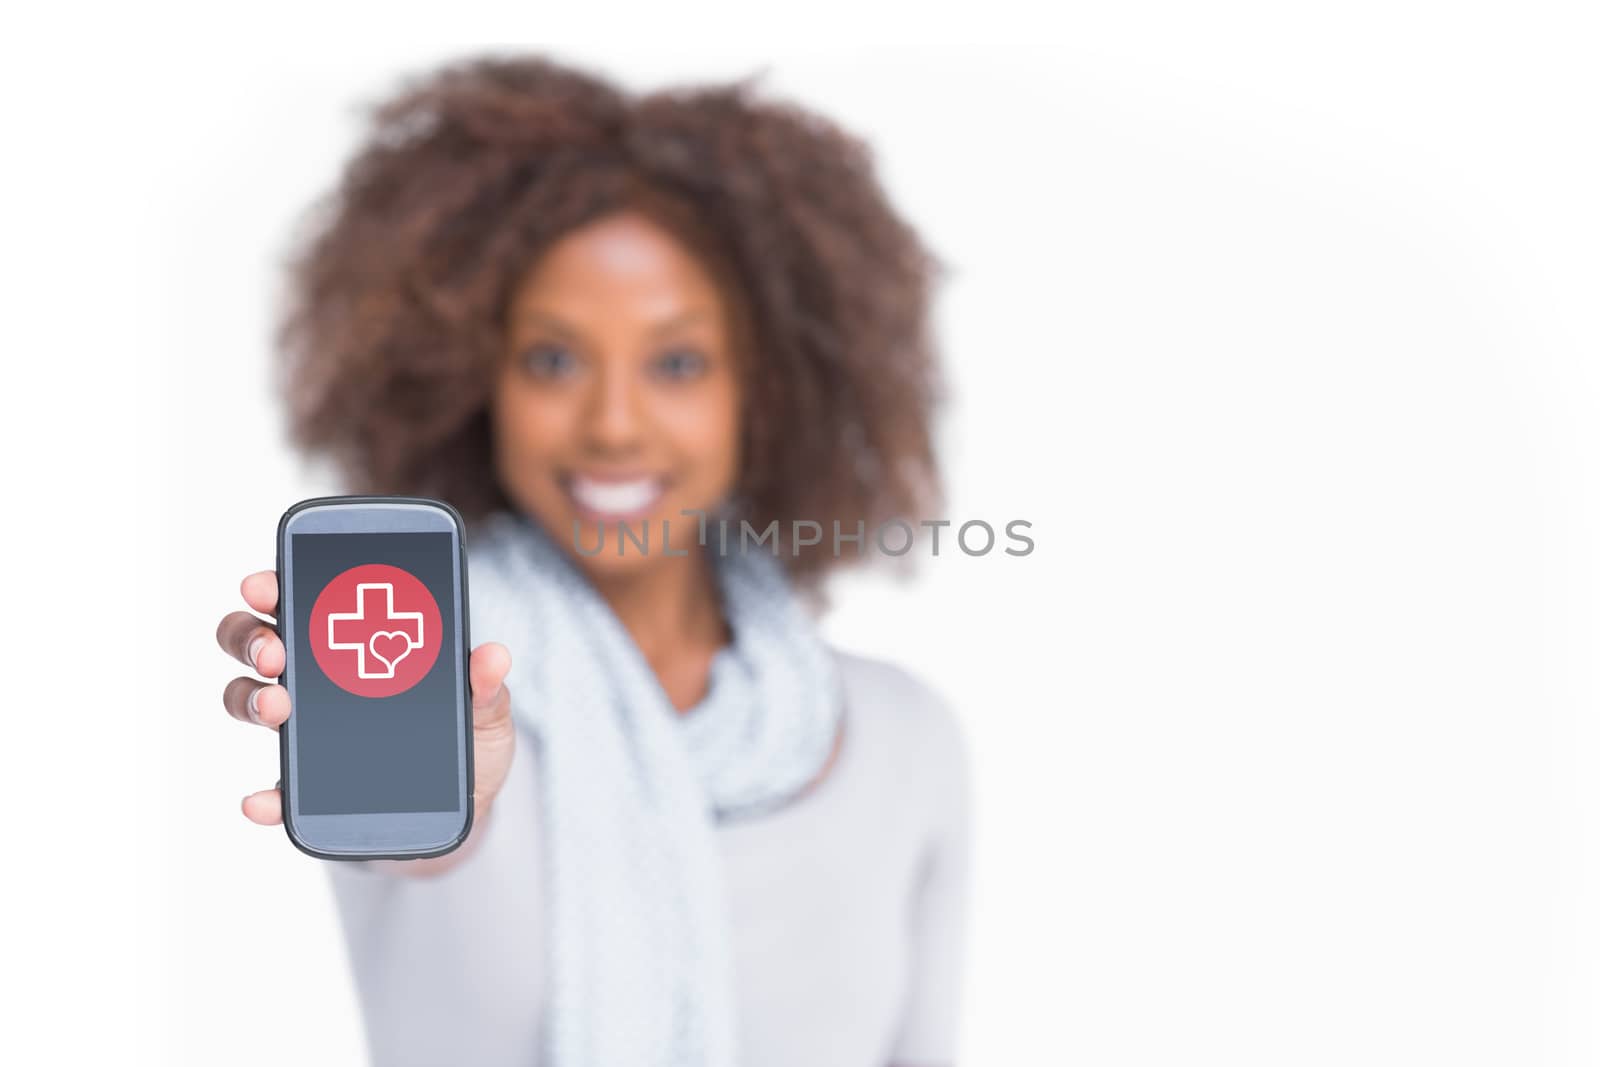 Composite image of woman with afro showing her smartphone by Wavebreakmedia